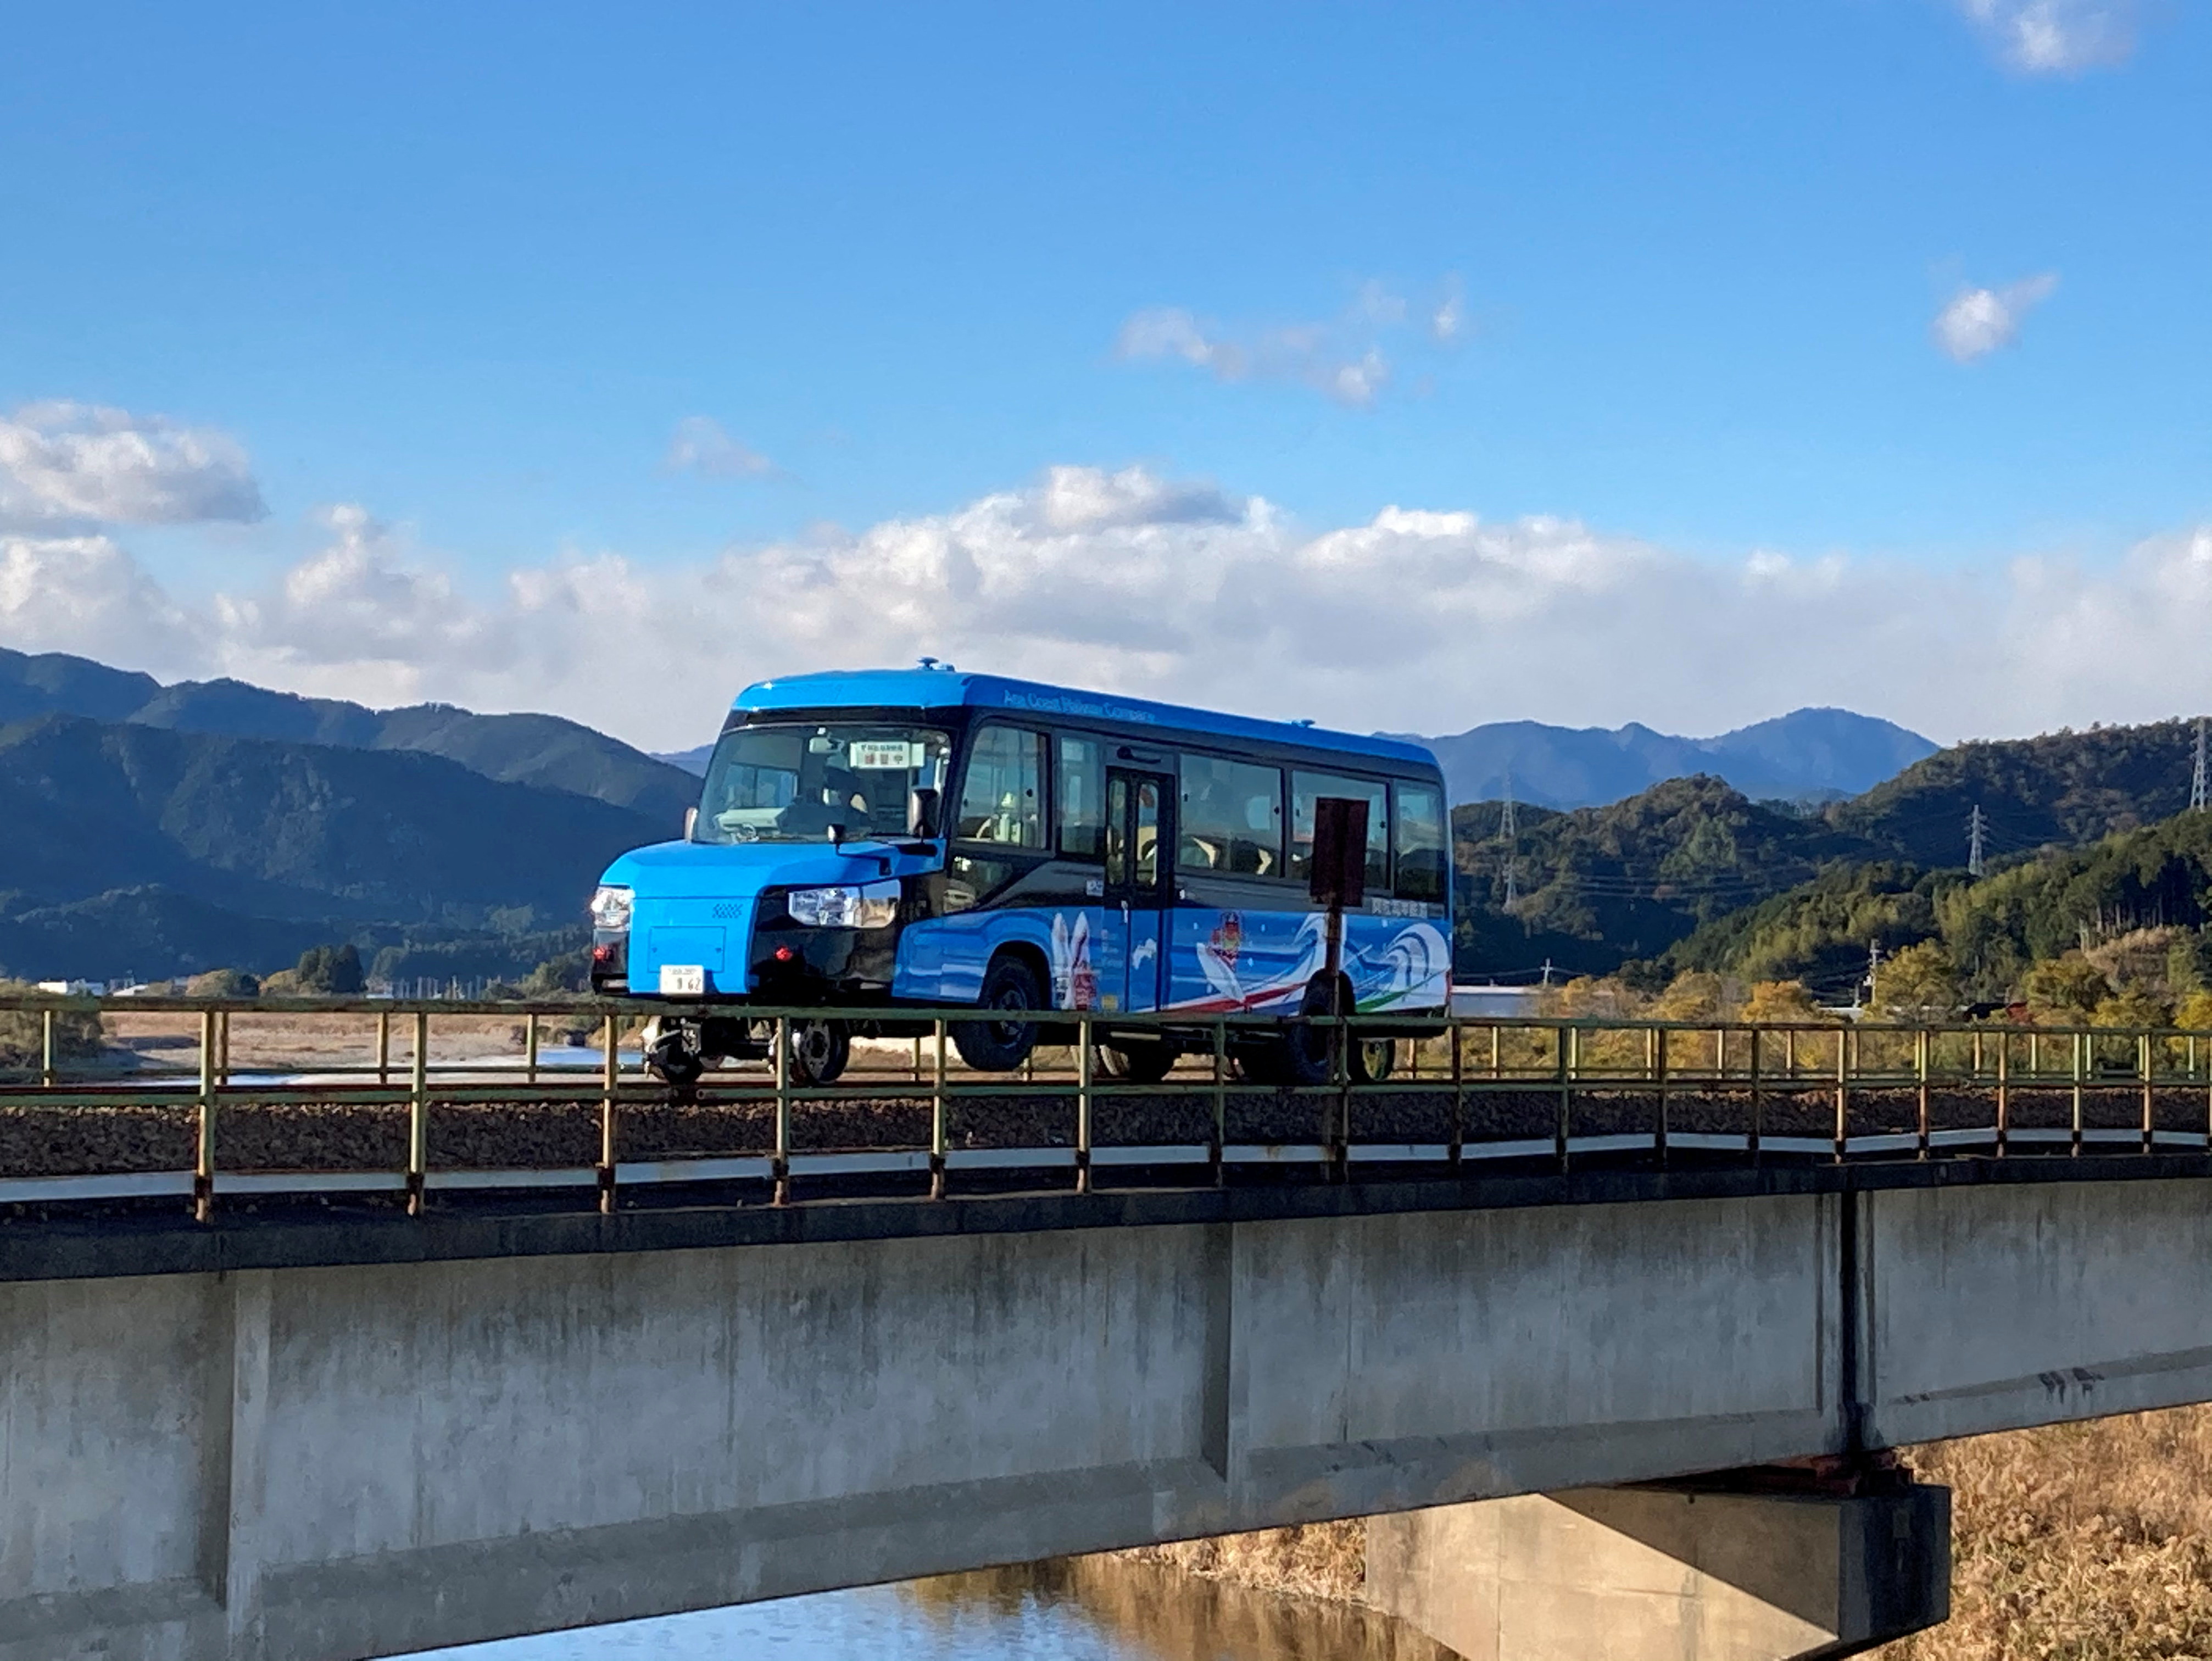 A 'Dual-Mode Vehicle (DMV)' bus that can run both on conventional road surfaces and a railway track, is seen during its test run in Kaiyo Town, Tokushima Prefectue, Japan, in this handout photo taken in December 2021 and released by Tokushima Prefectural Government, obtained by Reuters on December 24, 2021. Tokushima Prefectural Government/Handout via REUTERS  